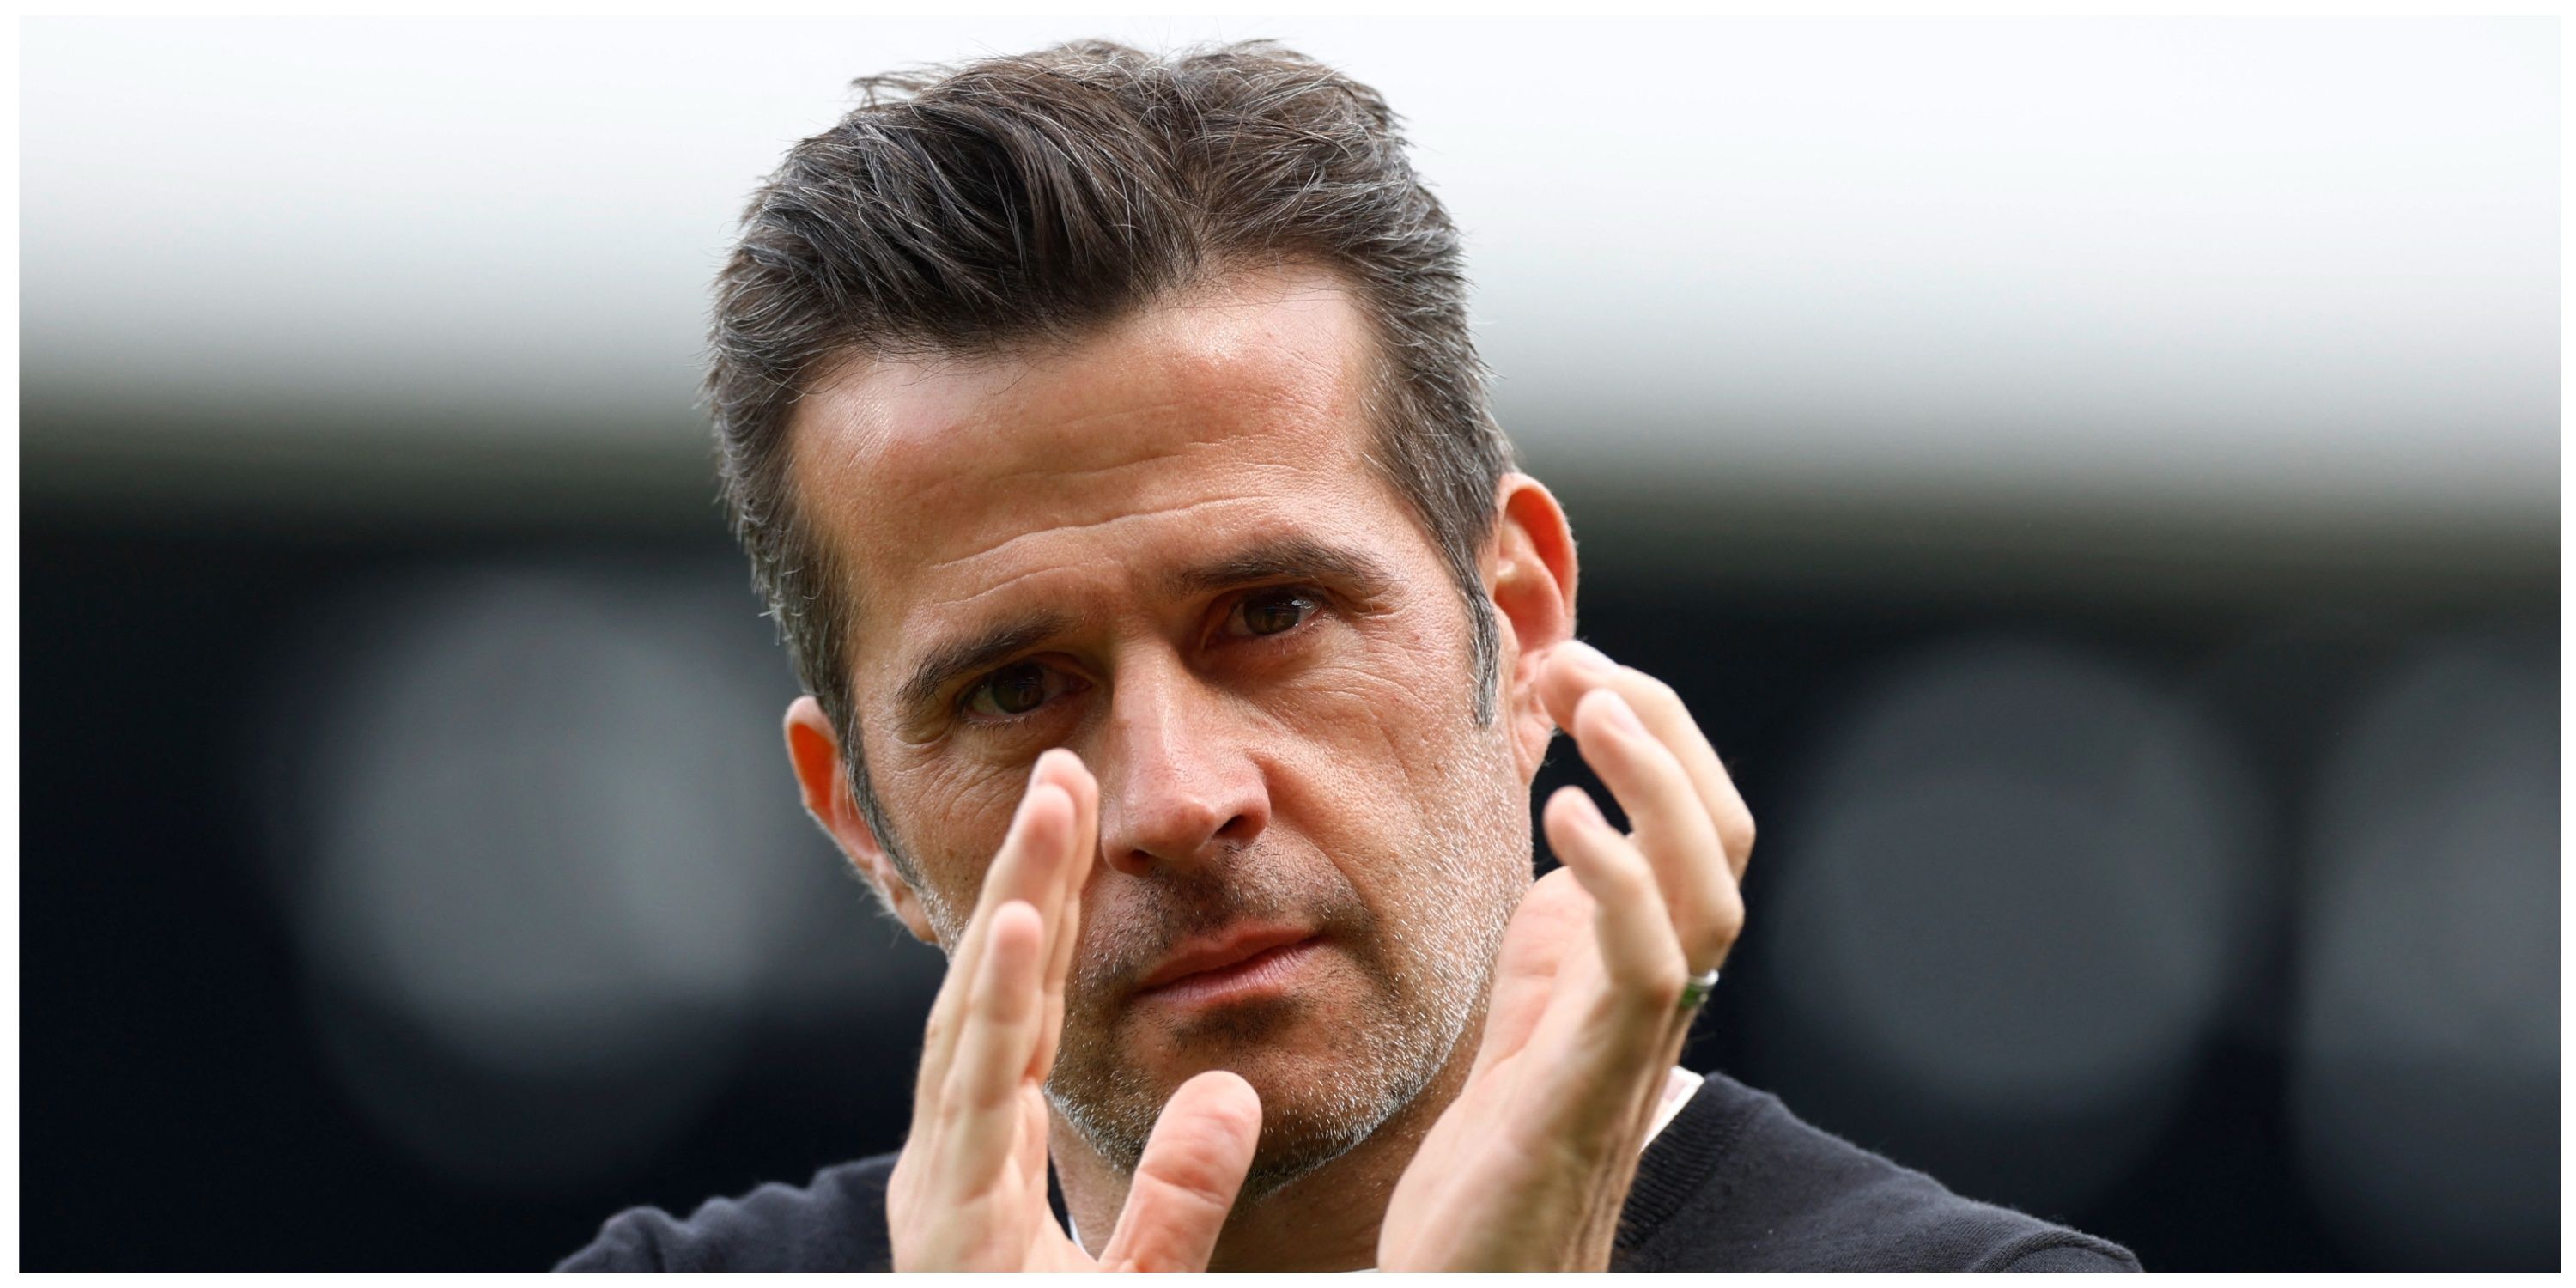 Fulham manager Marco Silva clapping